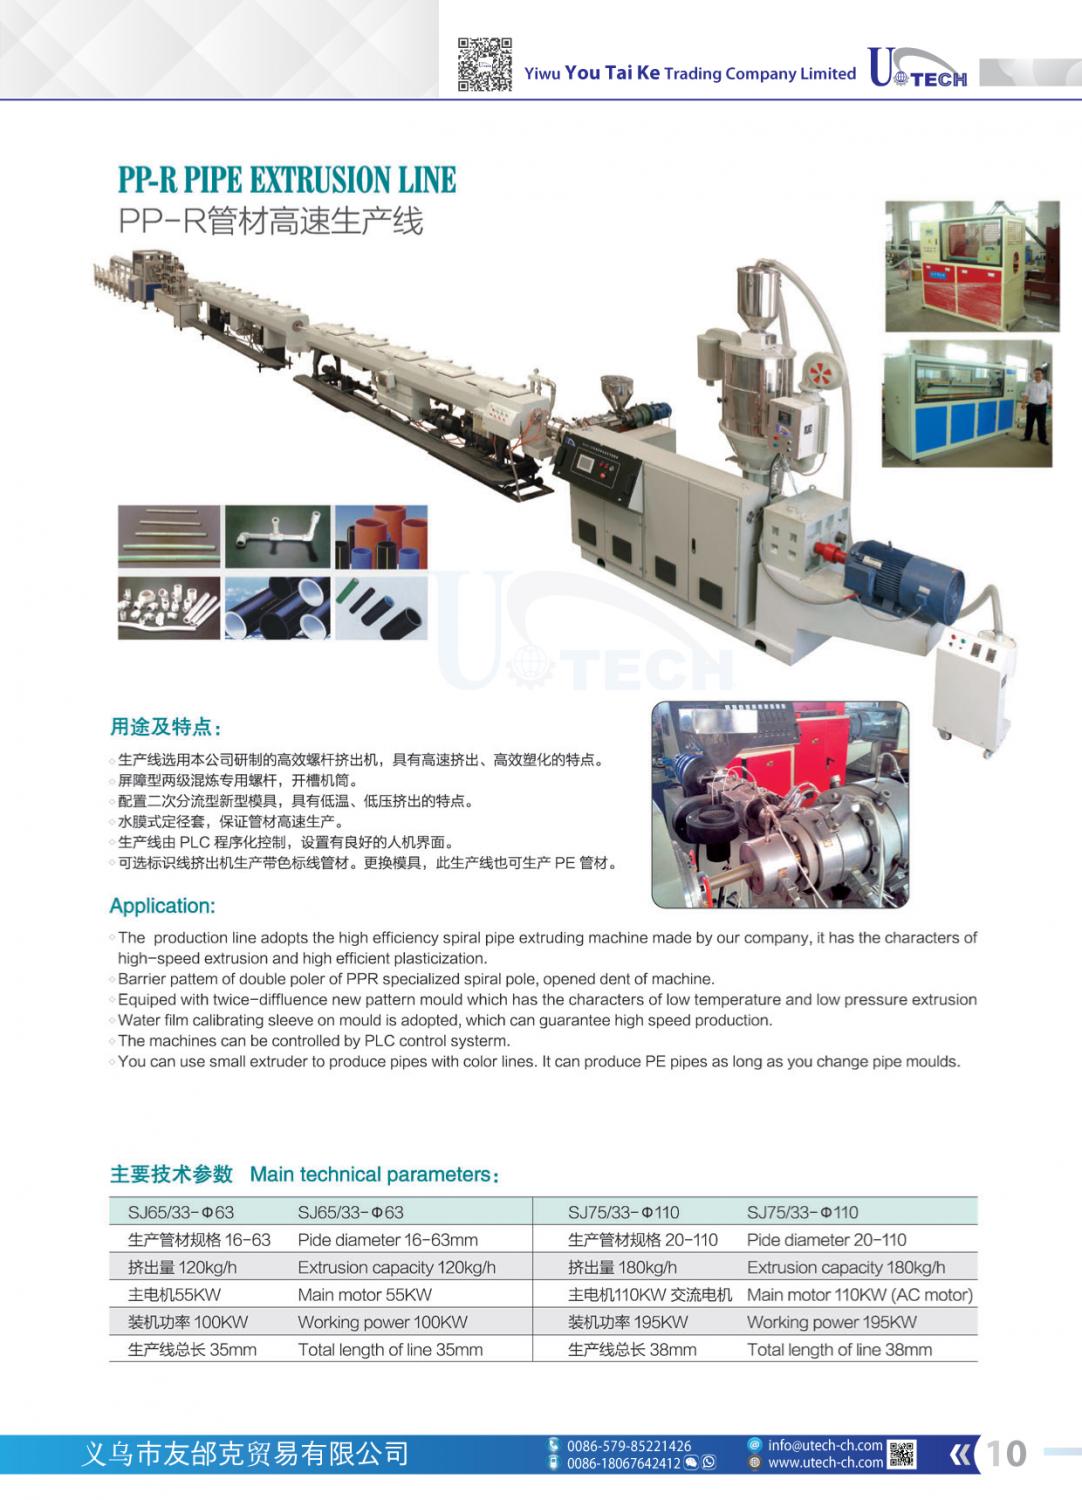 PP-R PIPE EXTRUSION LINE